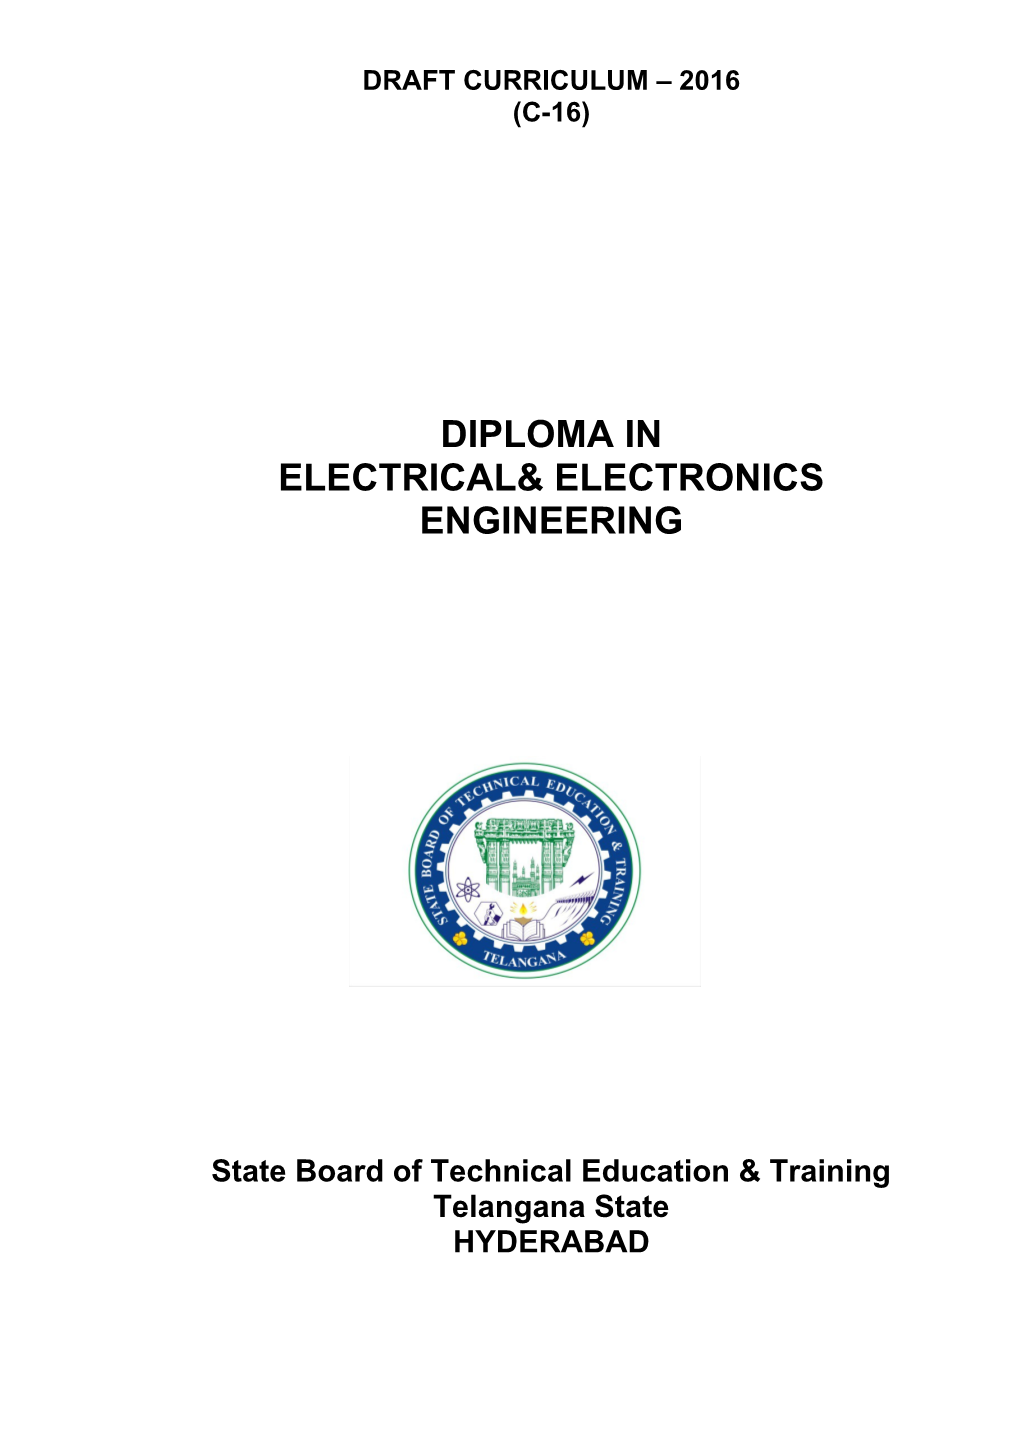 State Board of Technical Education & Training